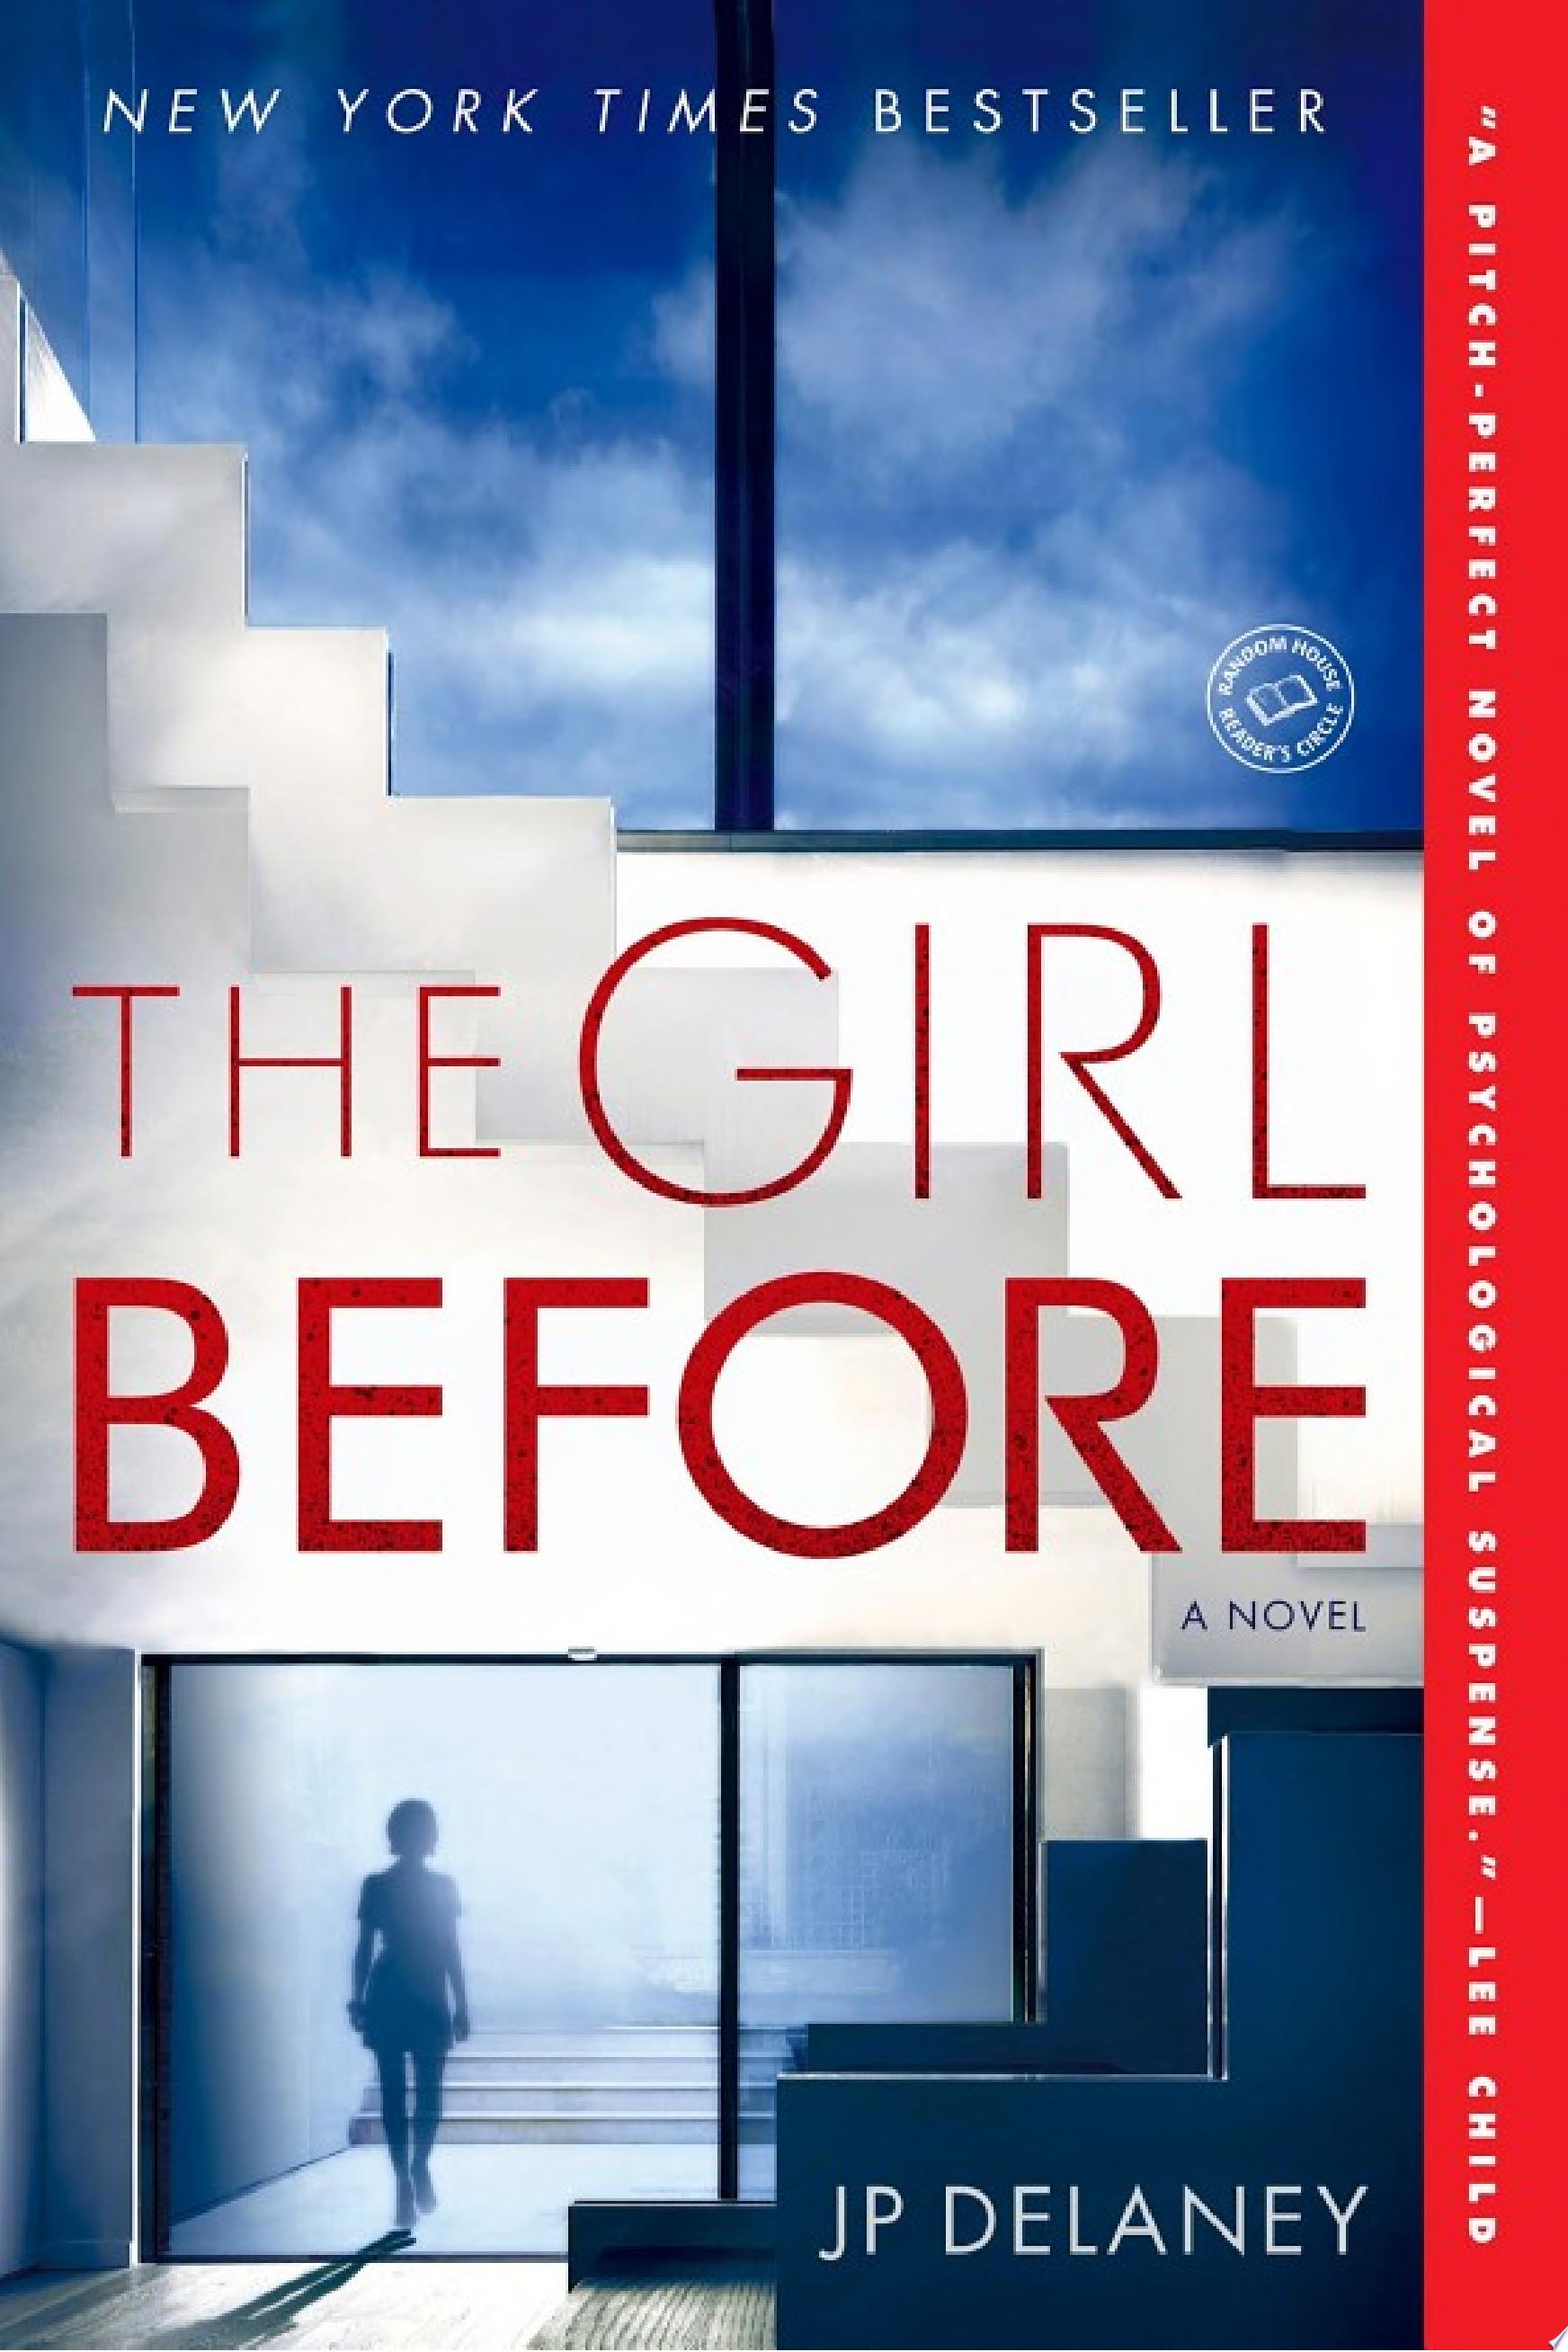 Image for "The Girl Before"